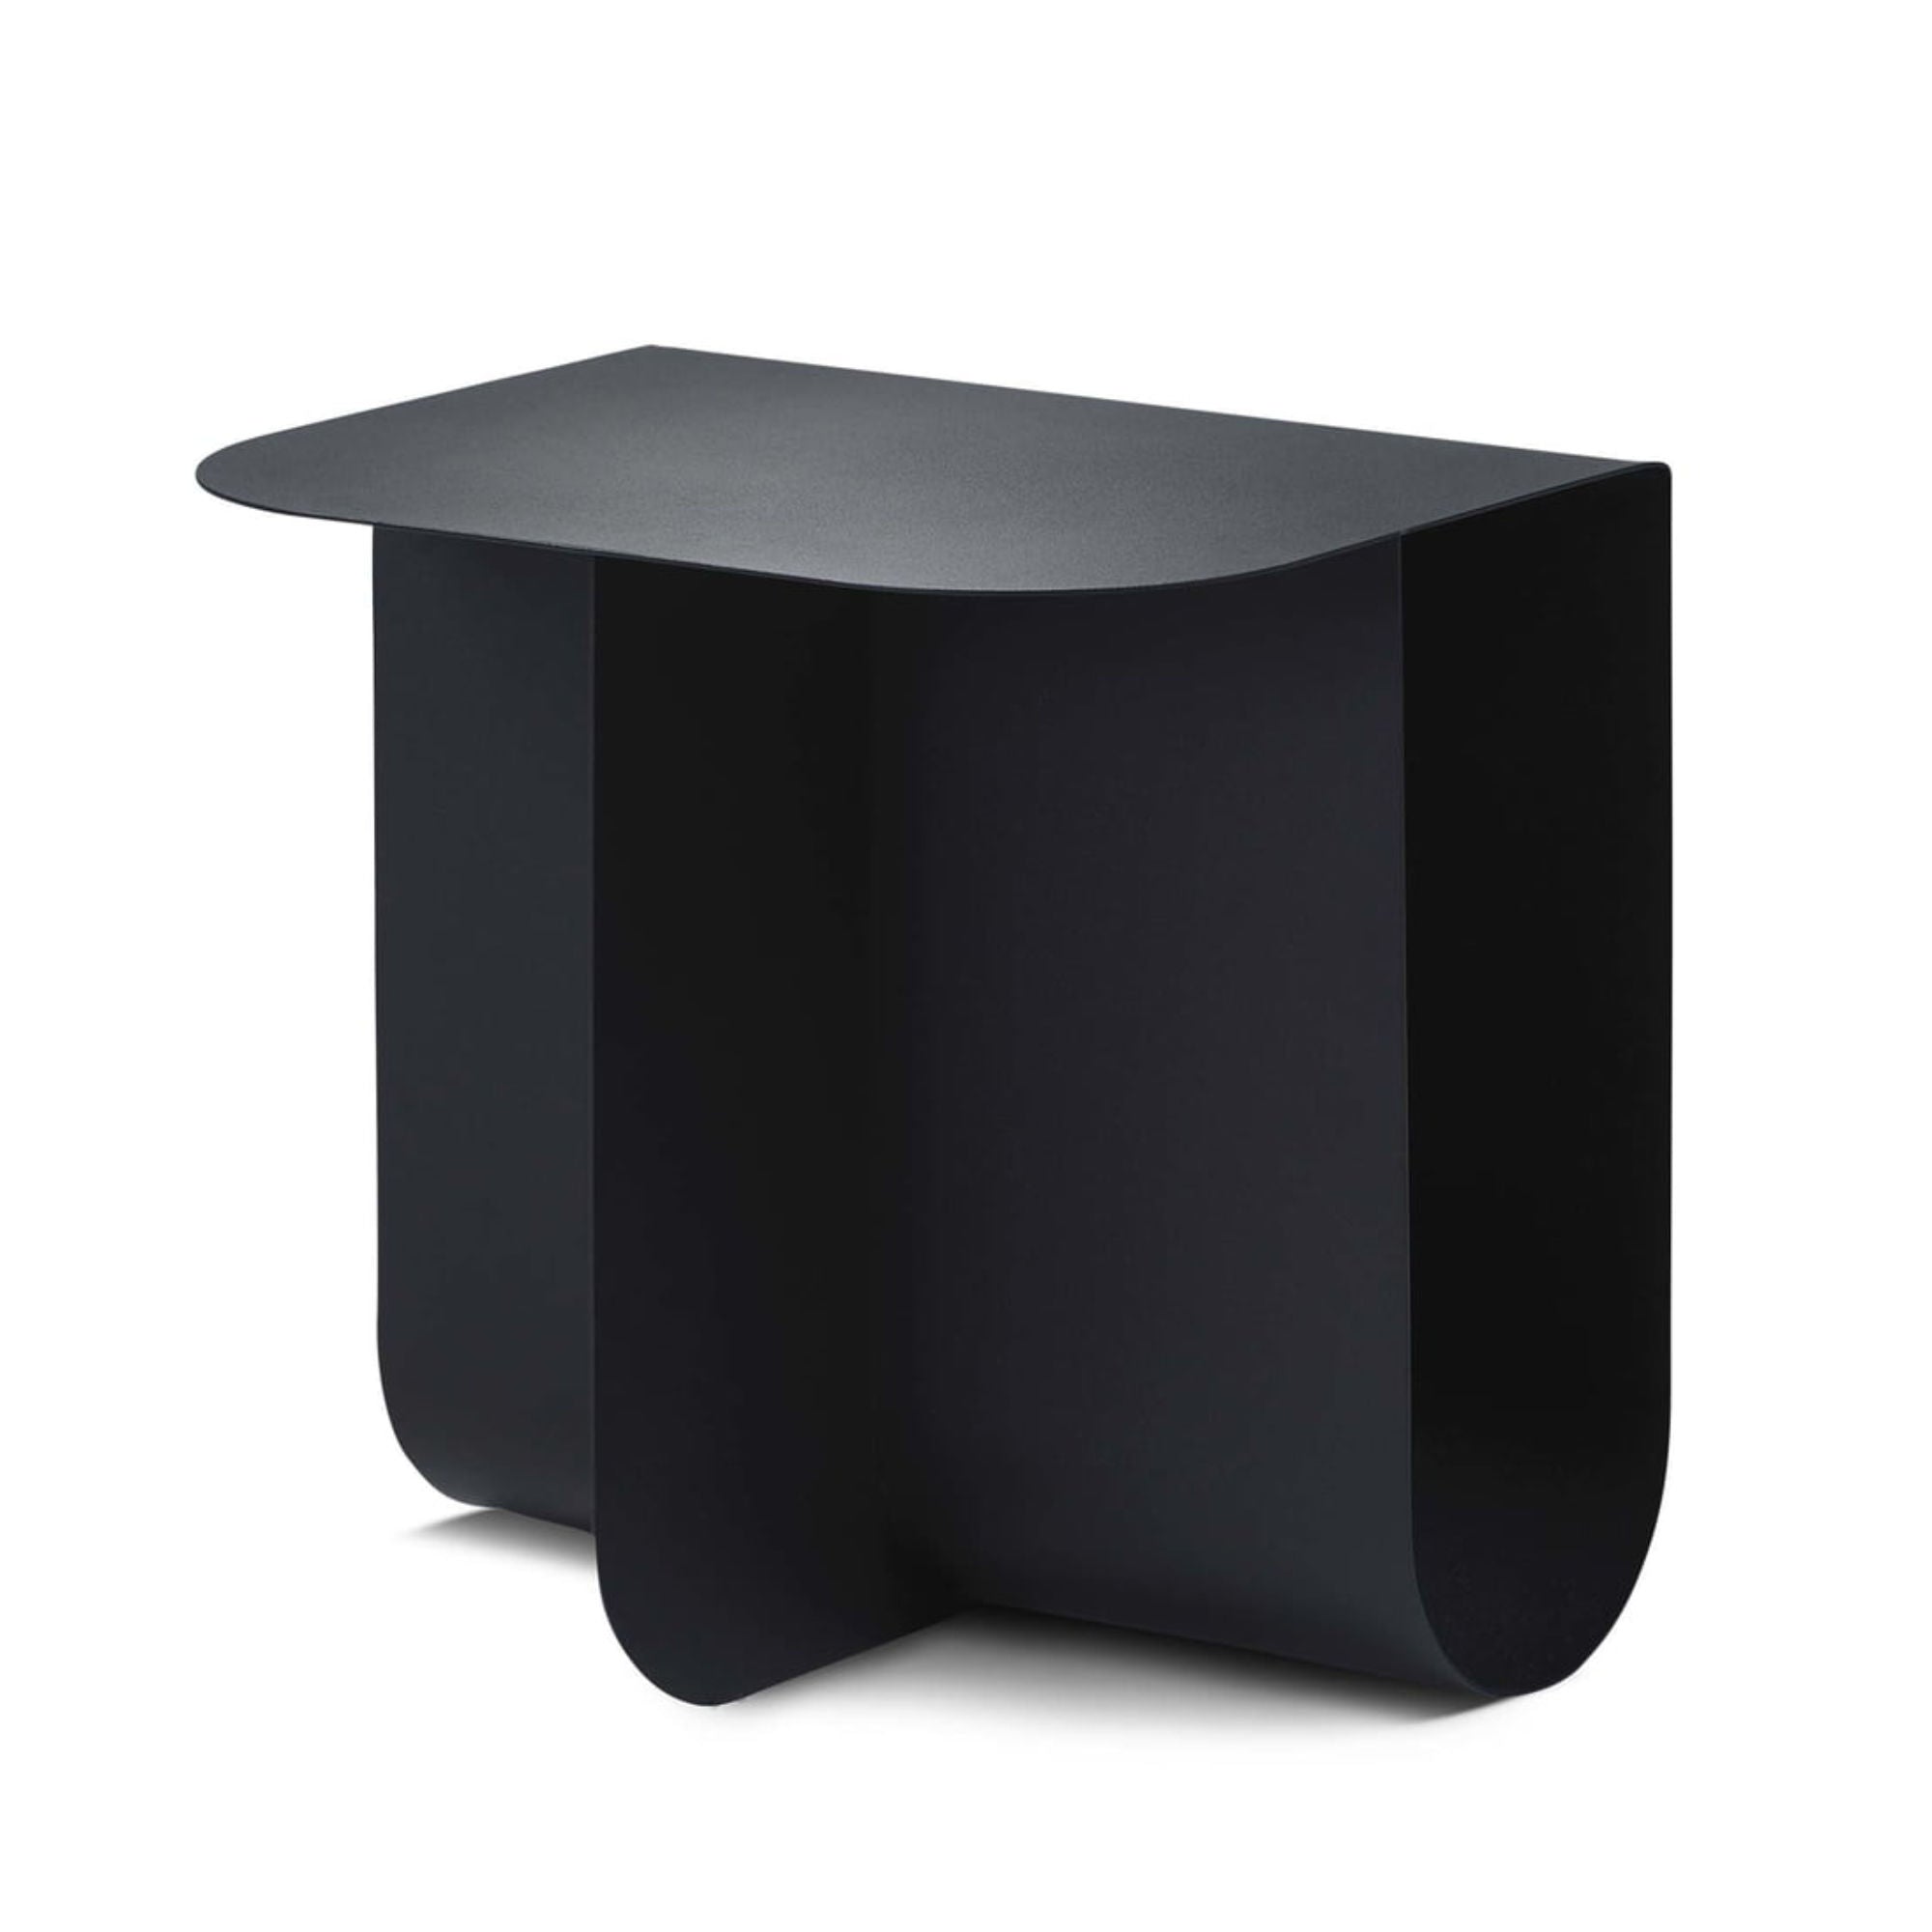 Northern Mass side table, black